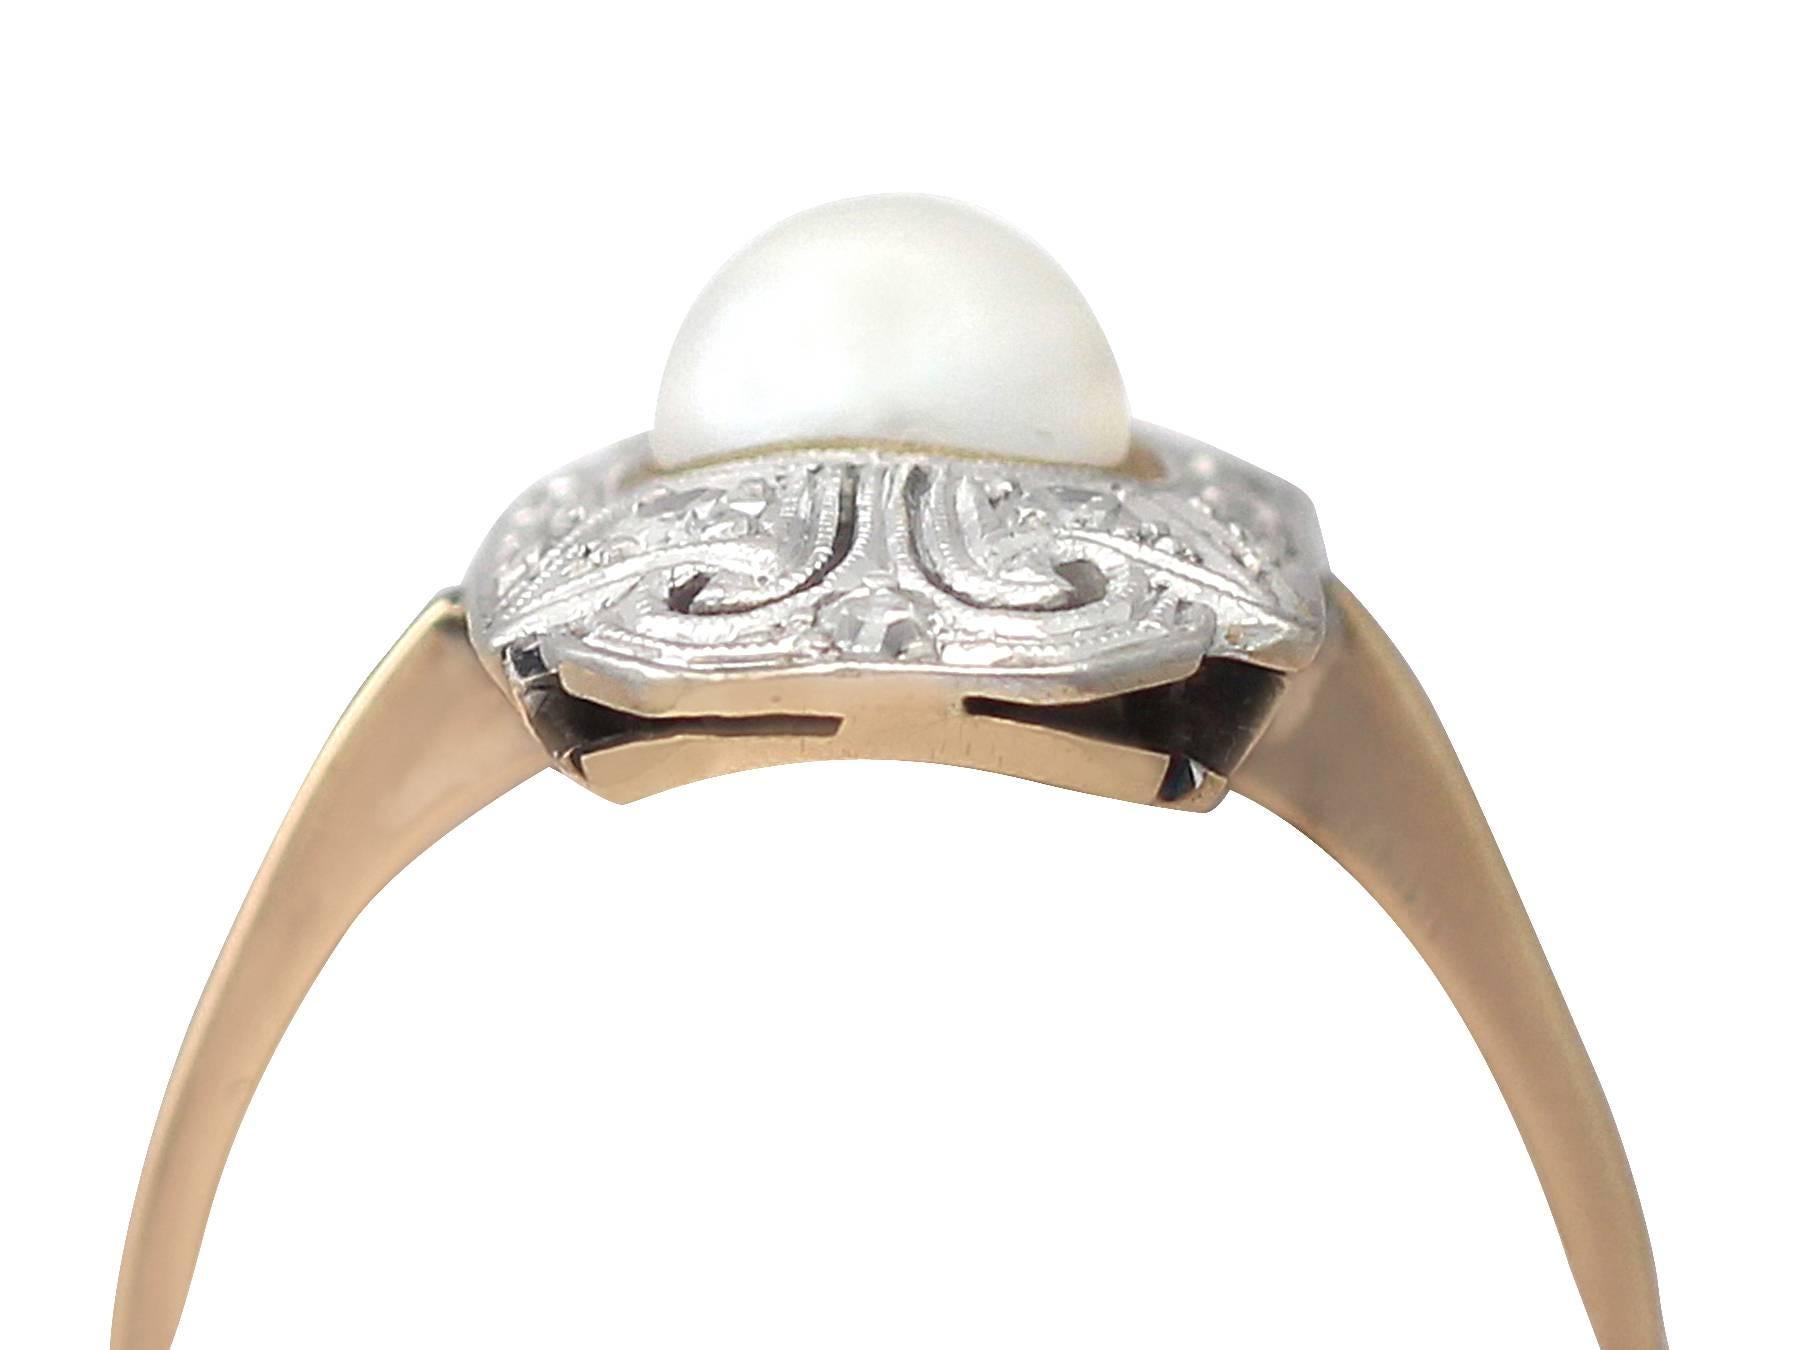 A fine and impressive 6mm natural pearl and 0.28 carat diamond, 14 karat yellow gold, platinum set dress ring; part of our antique jewelry and estate jewelry collections.

This fine and impressive pearl and diamond ring has been crafted in 14 k